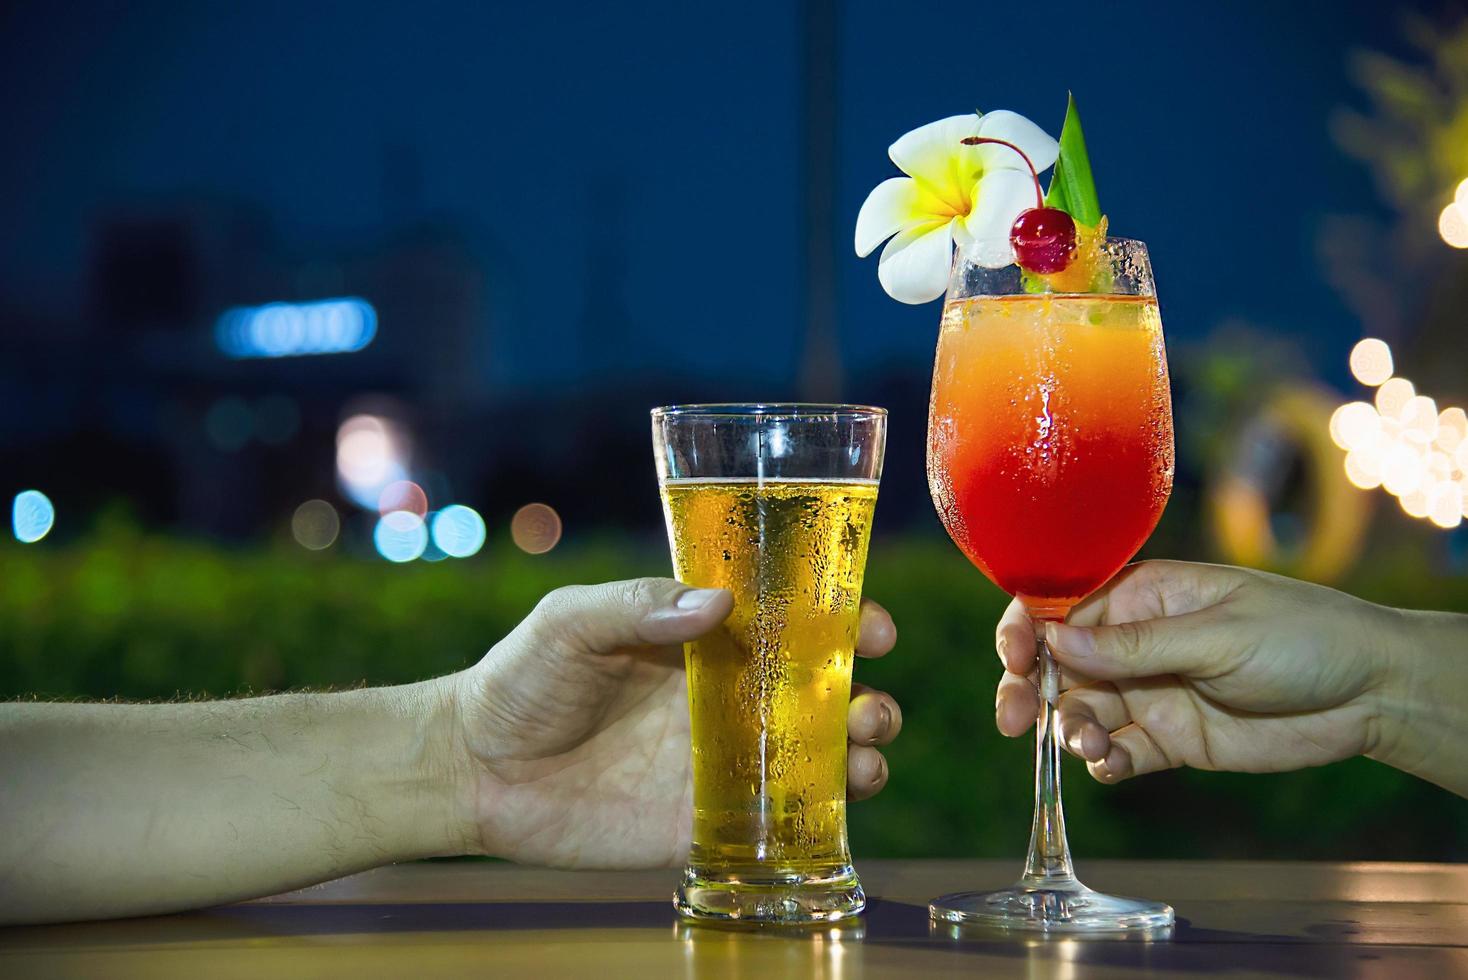 Couple celebration in restaurant with soft drink beer and mai tai or mai thai - happy lifestyle people with soft drink concept photo